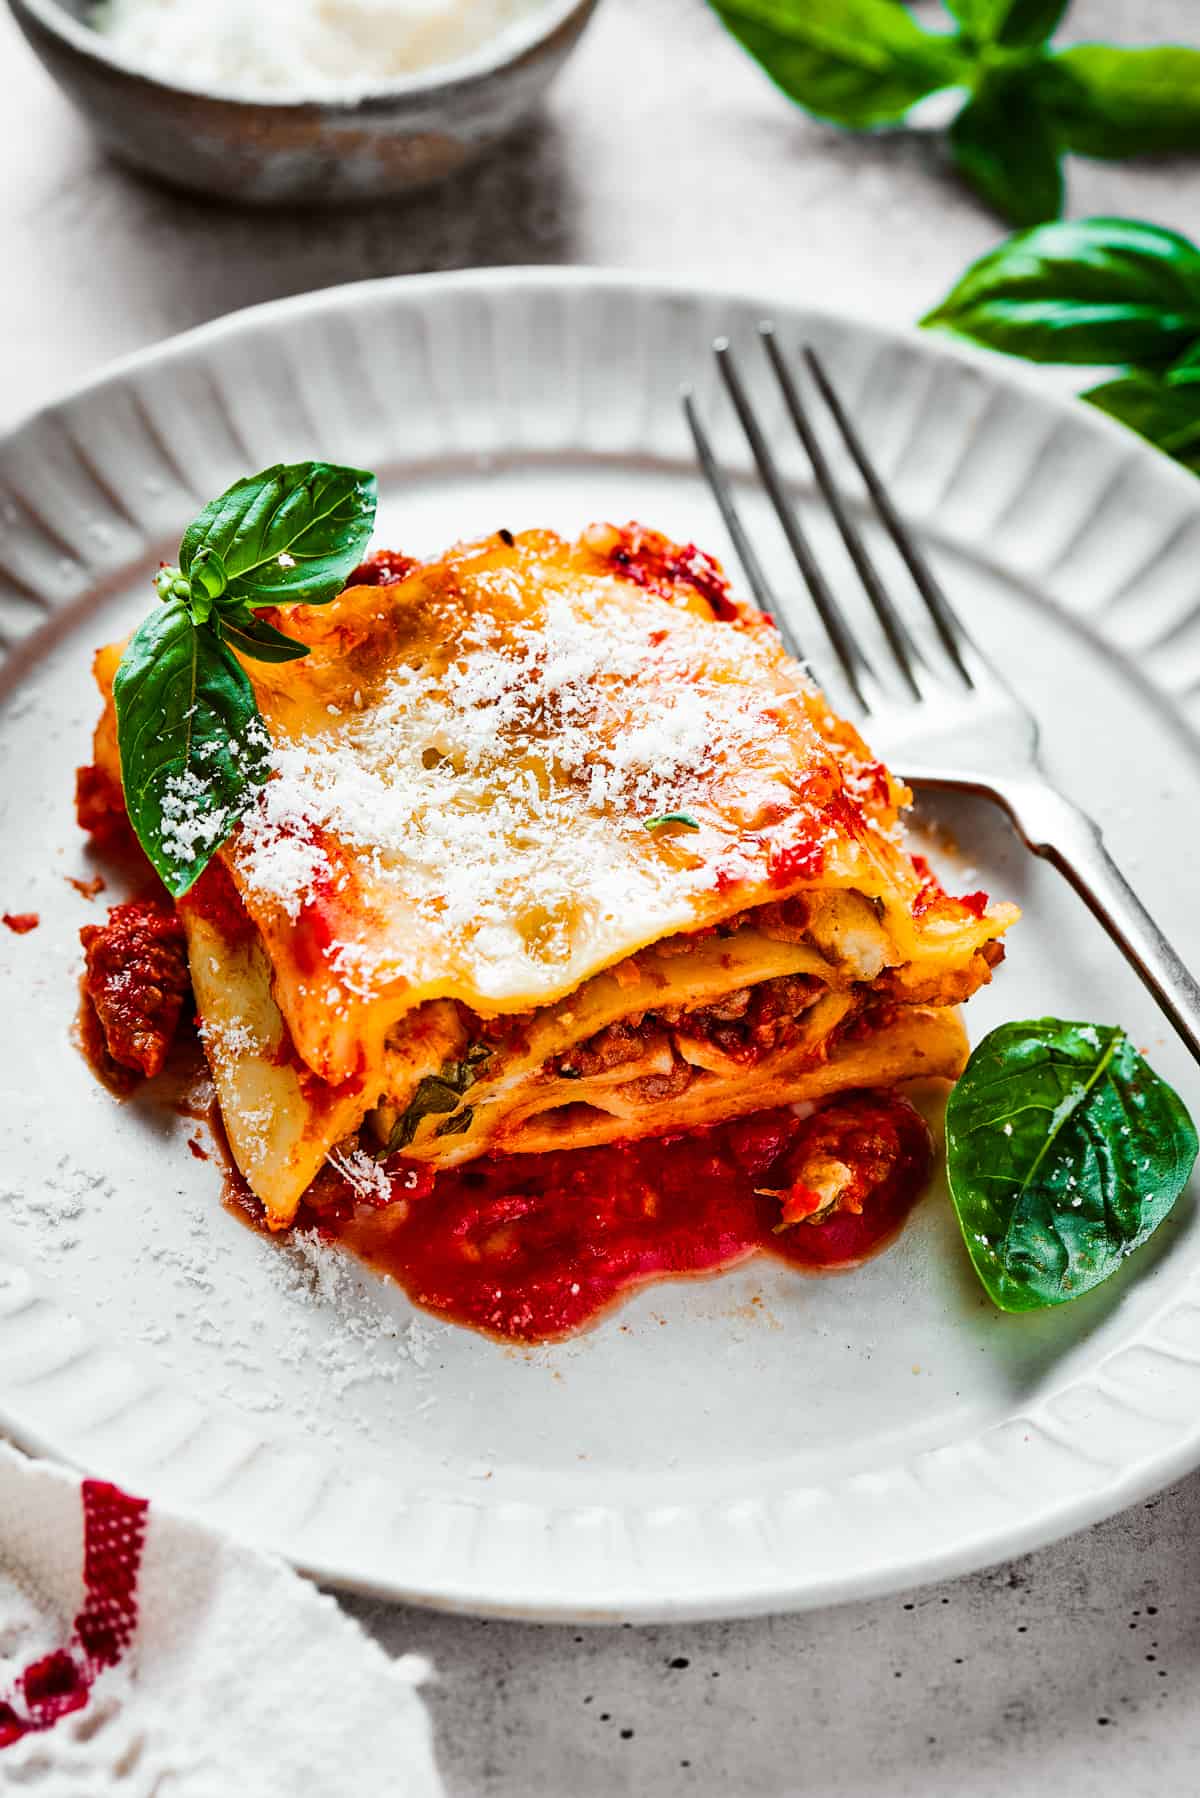 A lasagna roll on a plate with basil leaves and a fork.